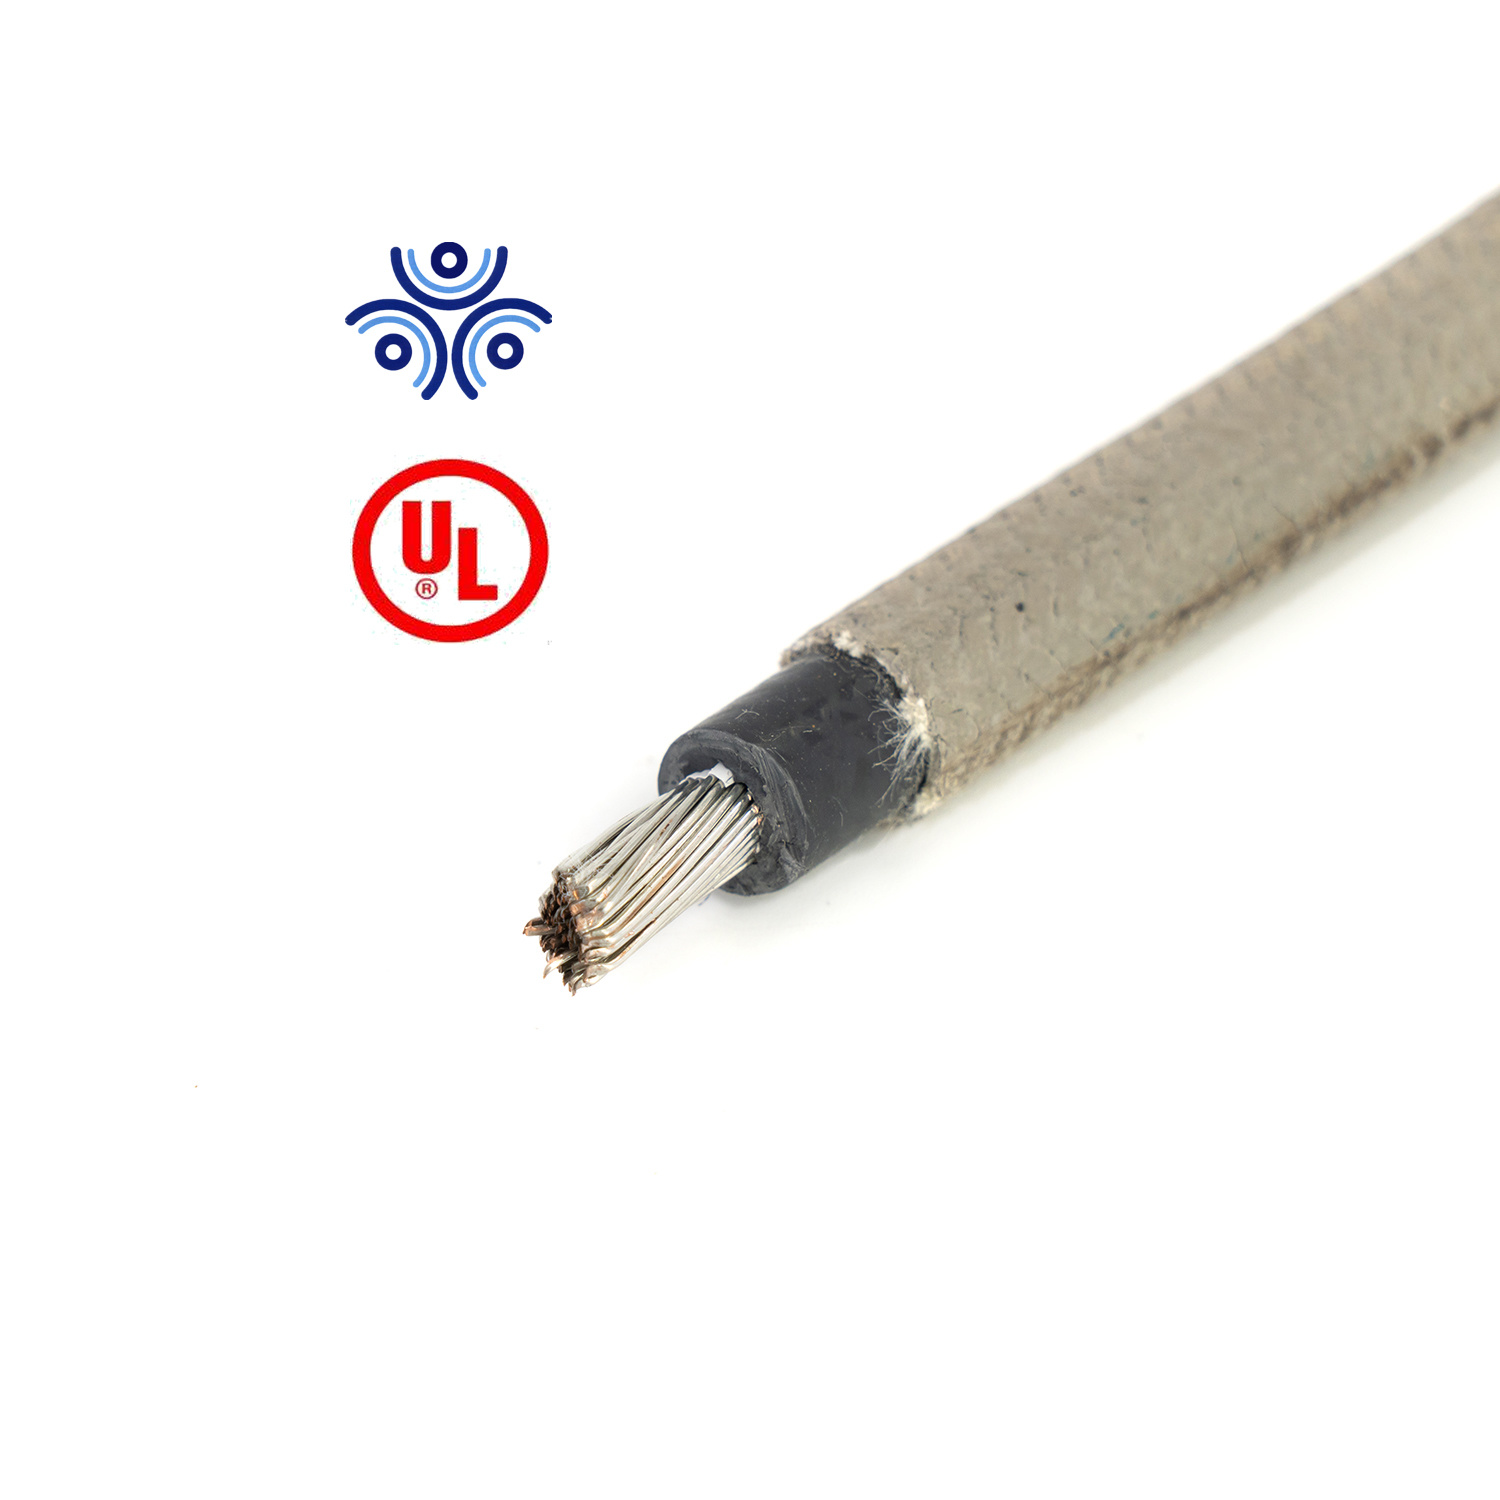 L3 Telecom Cable Rhh Cable Telecom Power Wire and Cable